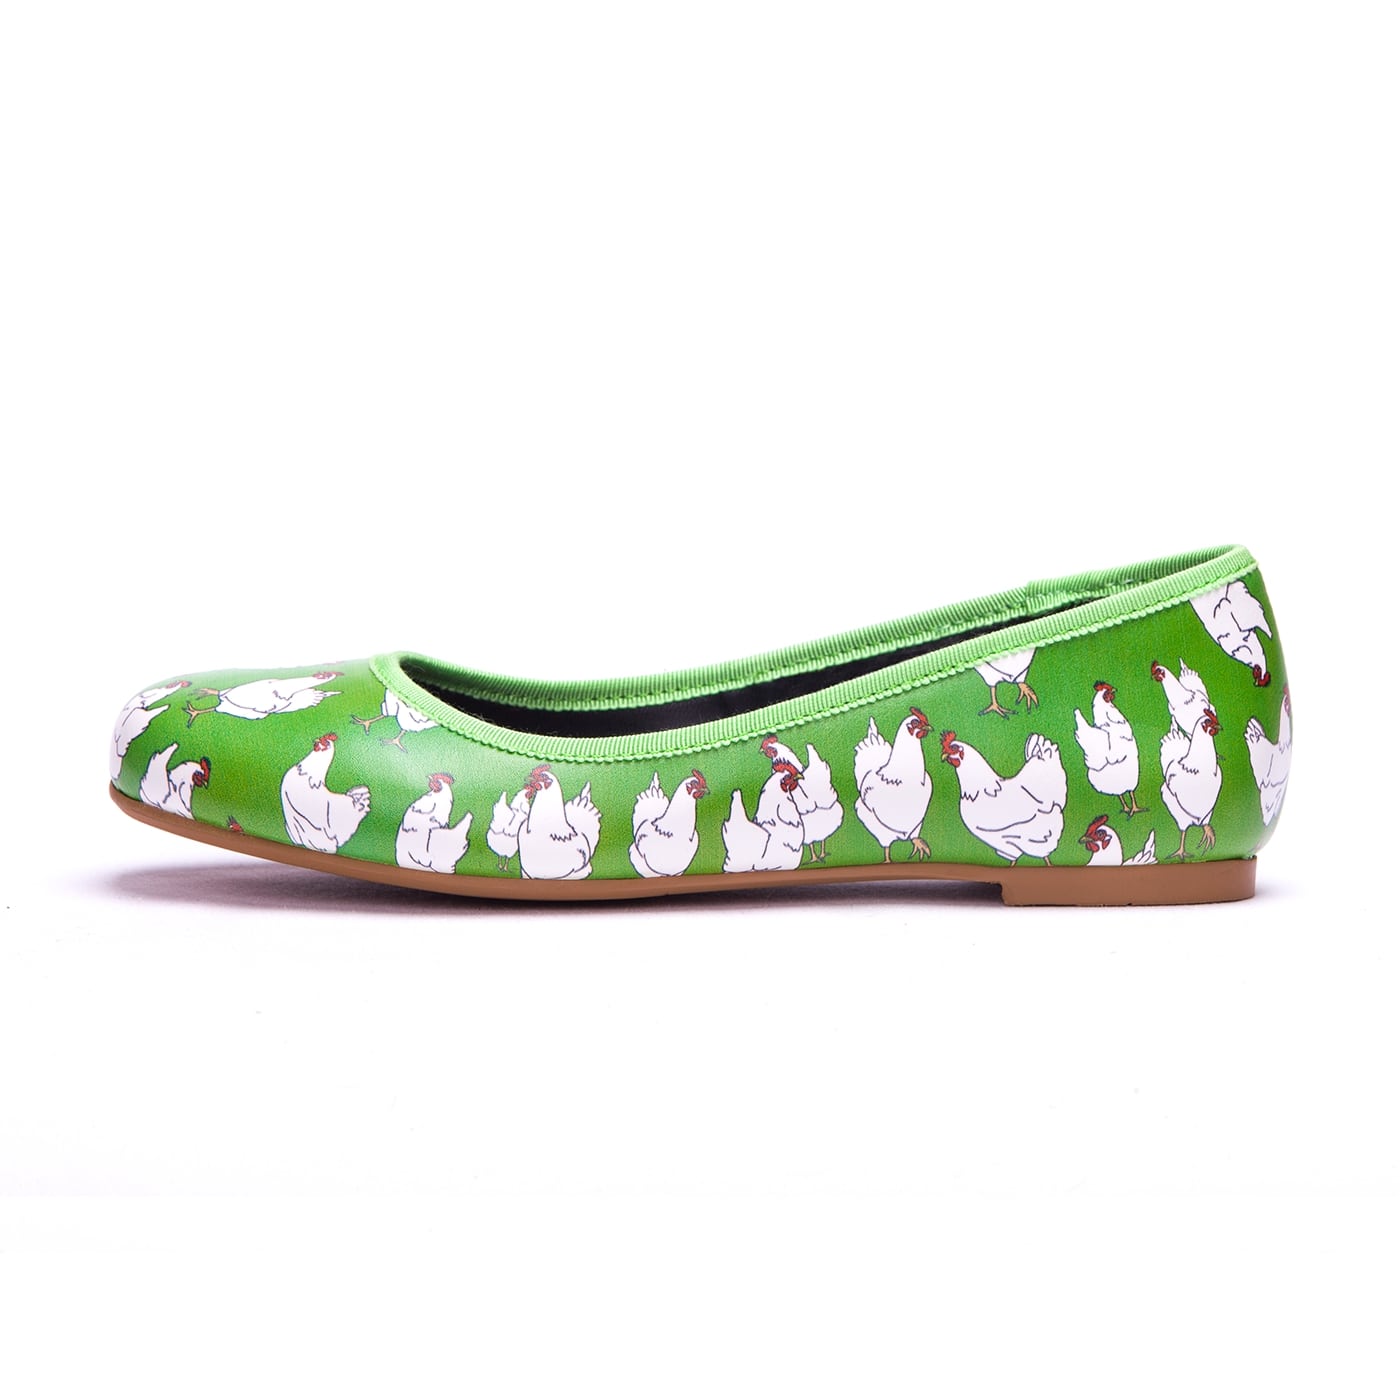 Flock Ballet Flats by RainbowsAndFairies.com (Chicken - Chooks - Bright Green - Quirky Shoes - Slip Ons - Comfy Flats) - SKU: FW_BALET_FLOCK_ORG - Pic 03